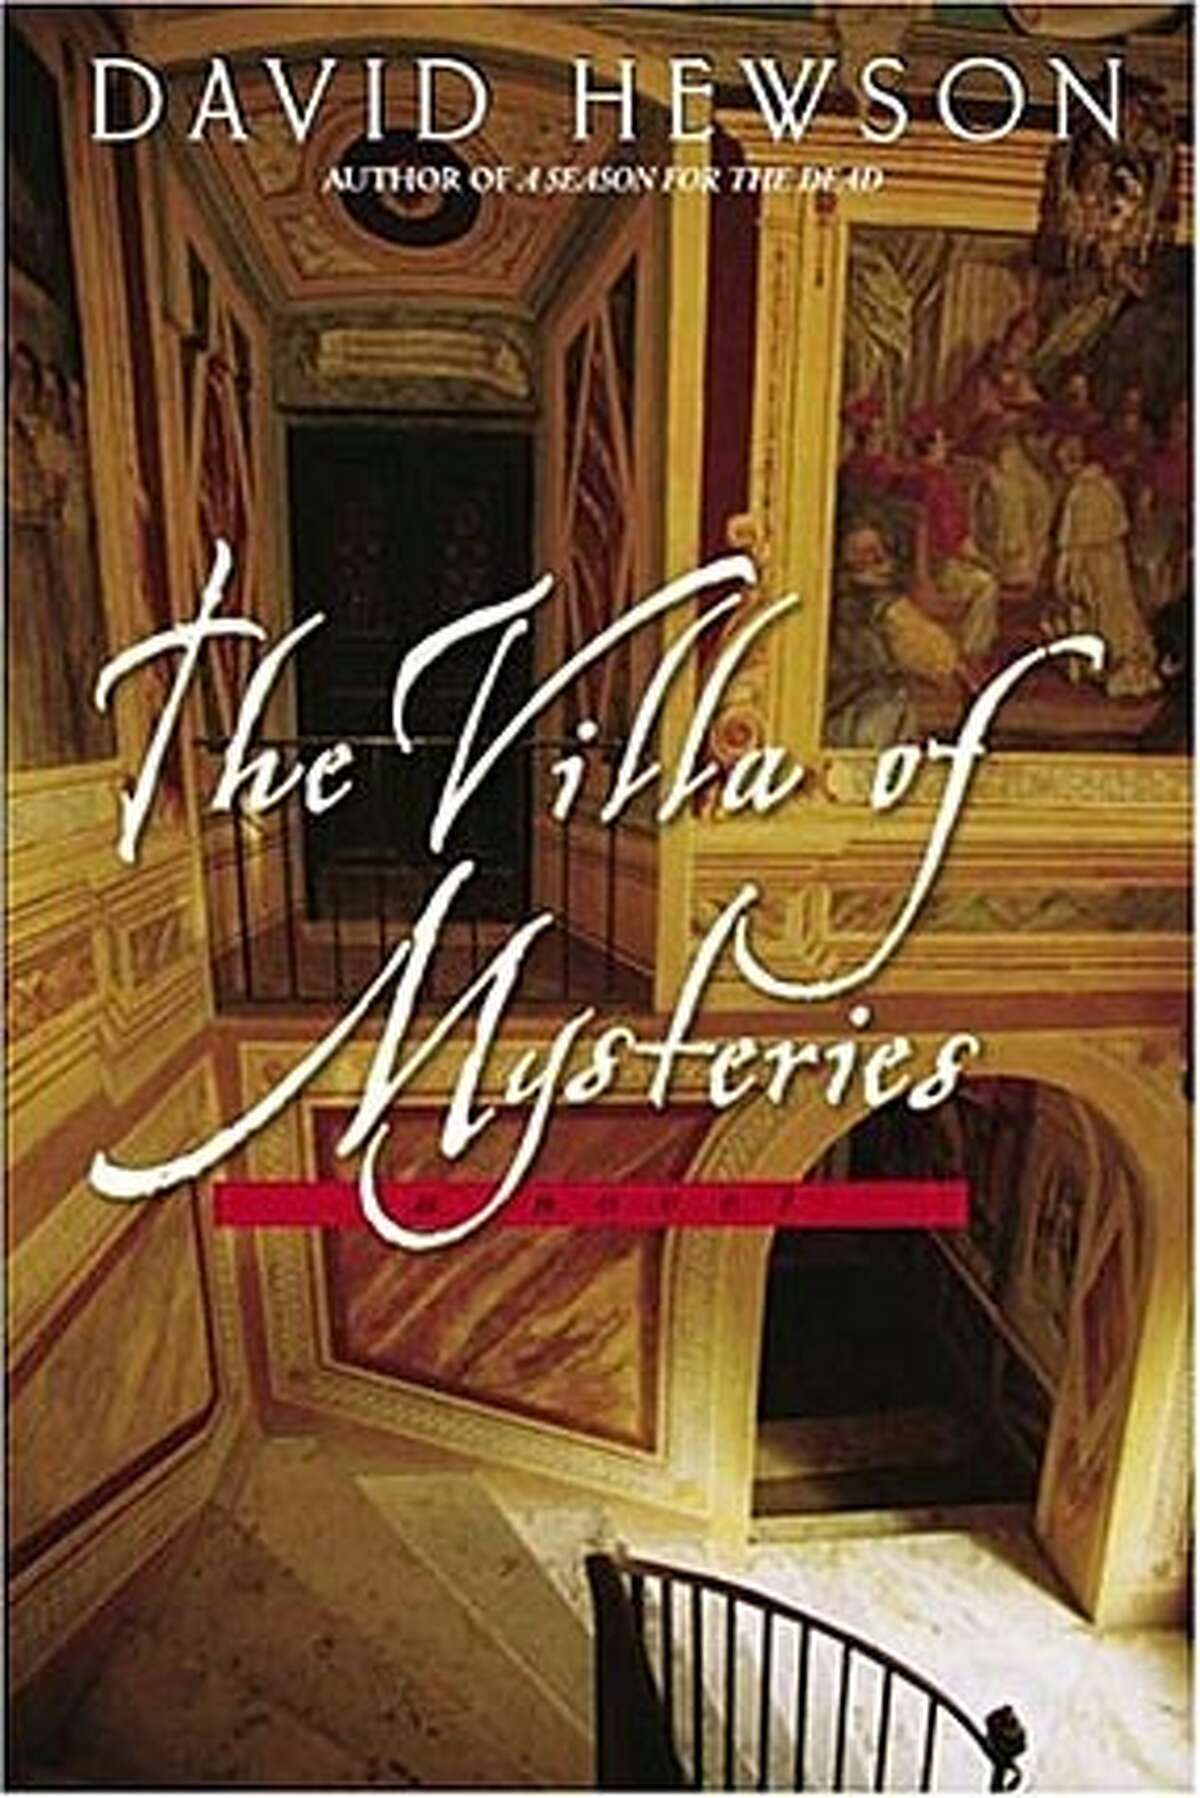 Book cover art for, "The Villa of Mysteries" by David Hewson.